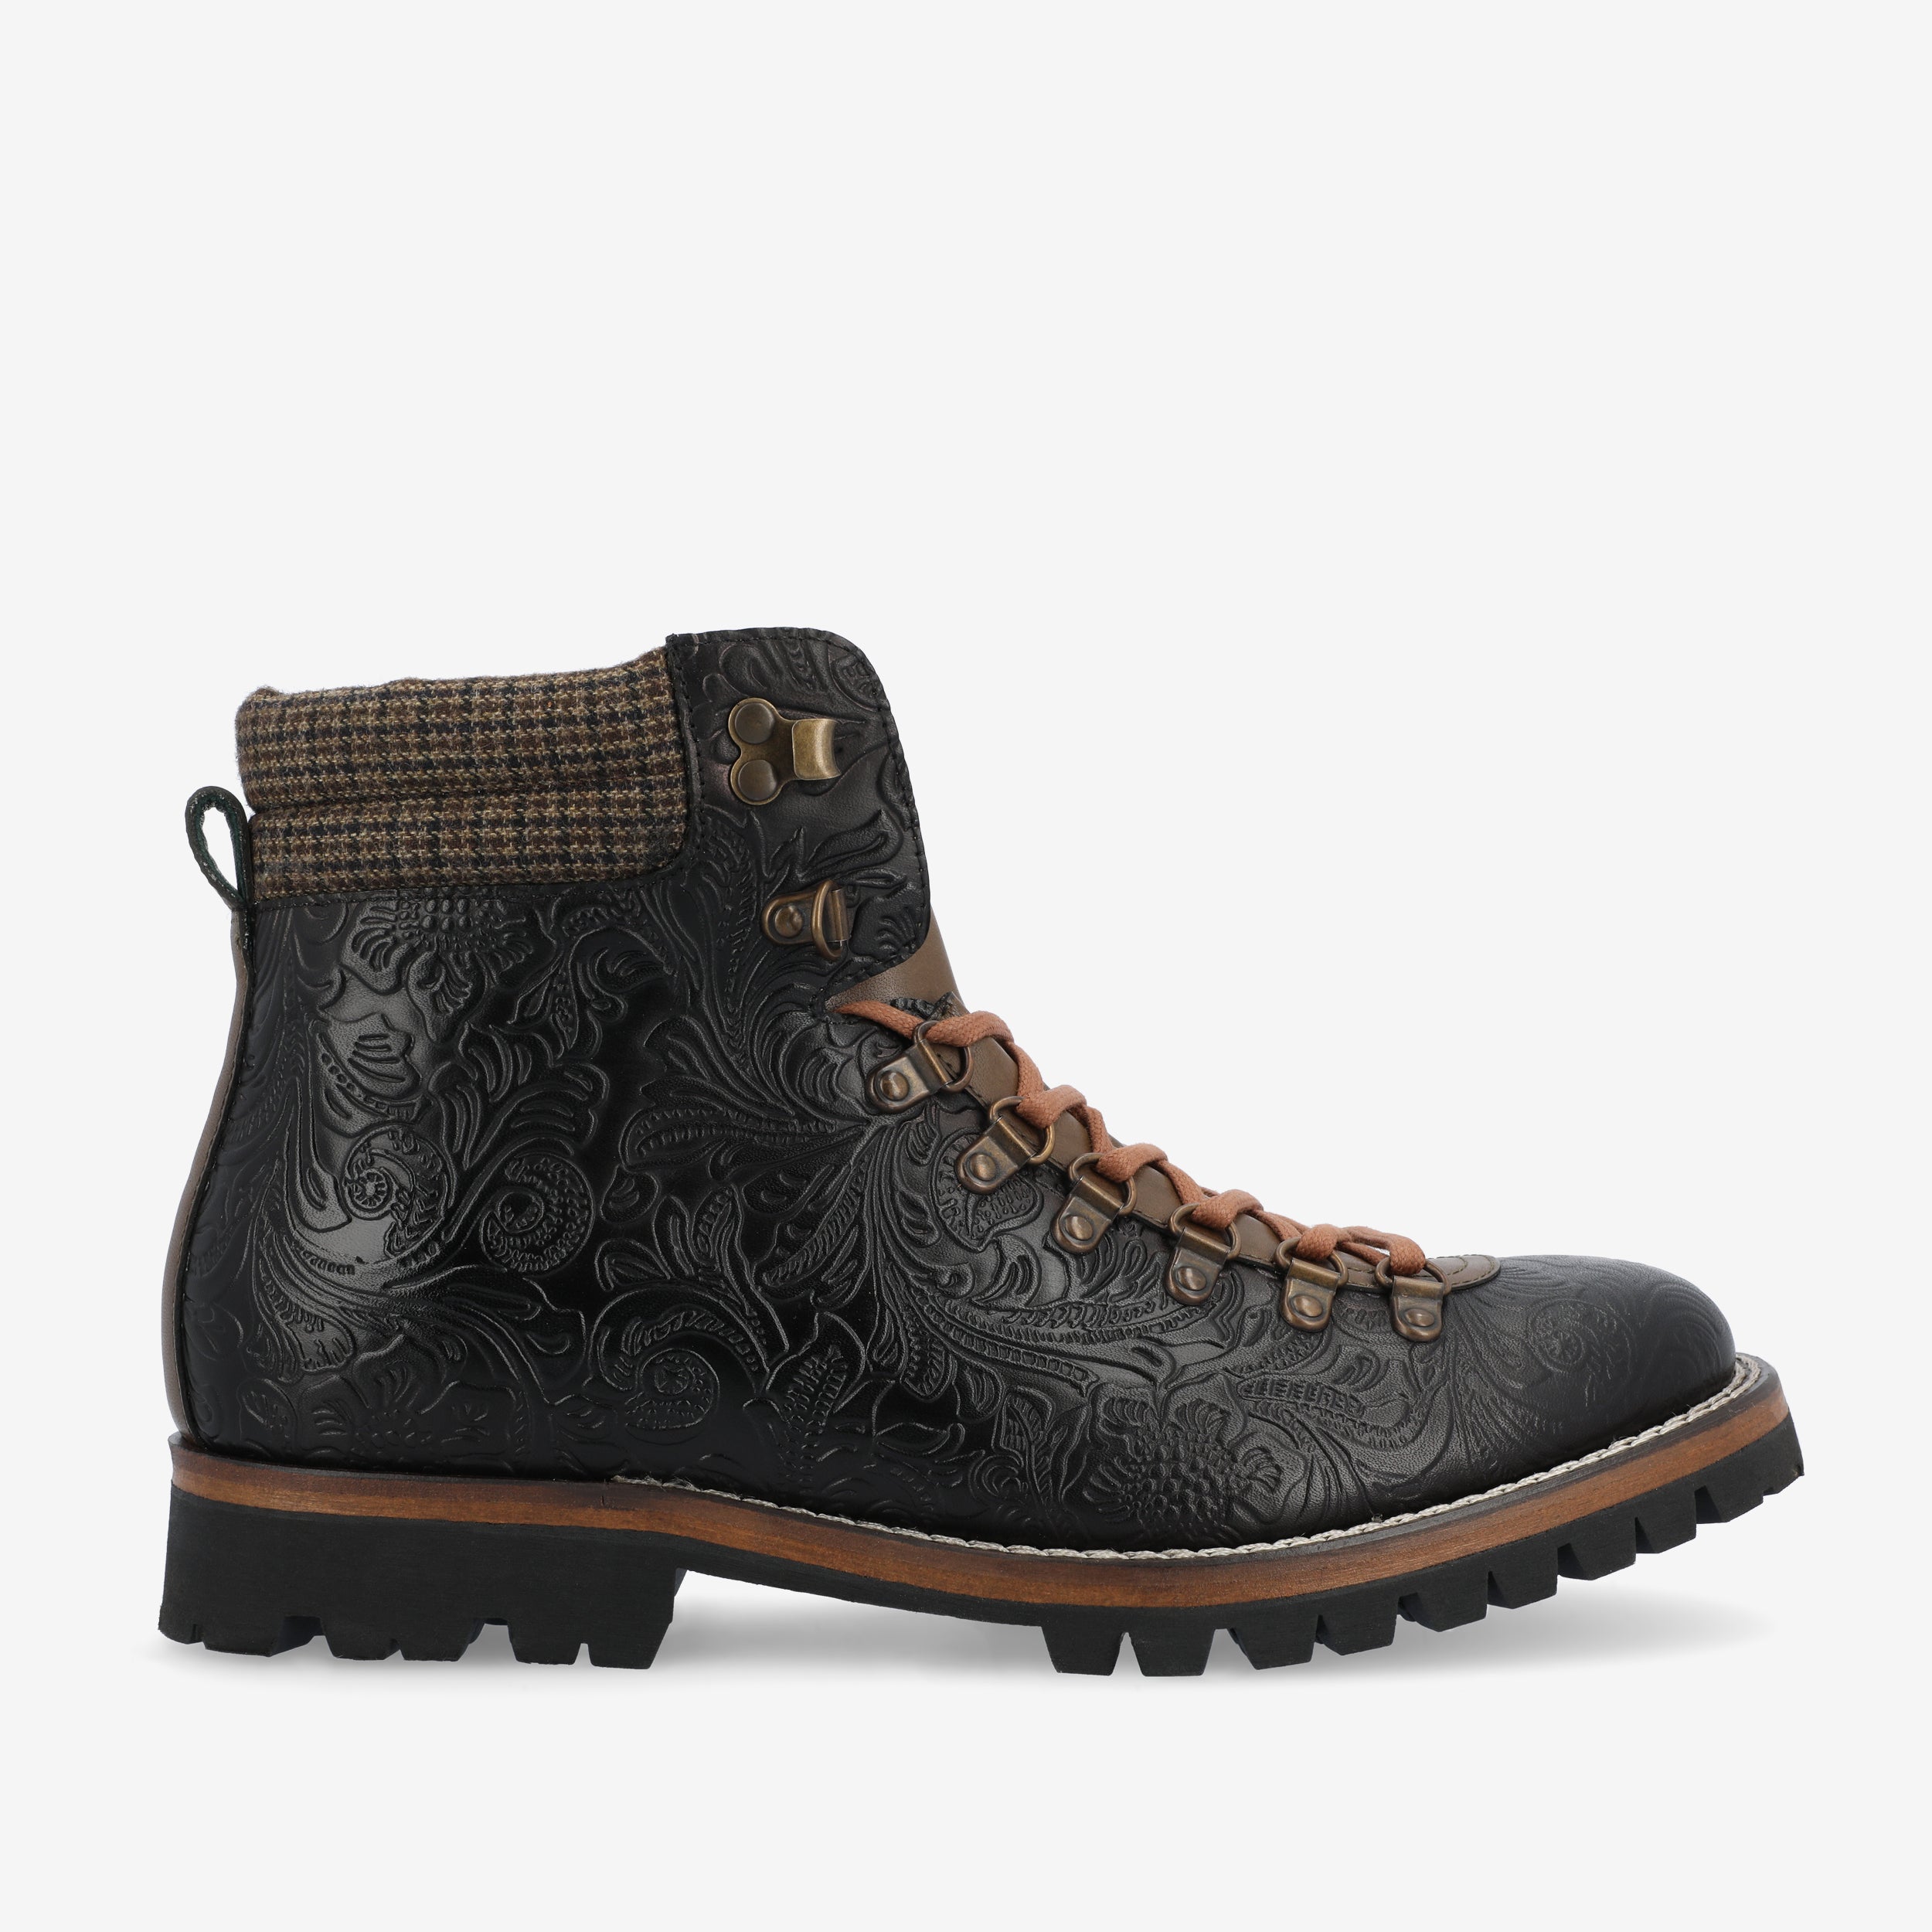 The Viking Boot in Black Floral (Last Chance, Final Sale)